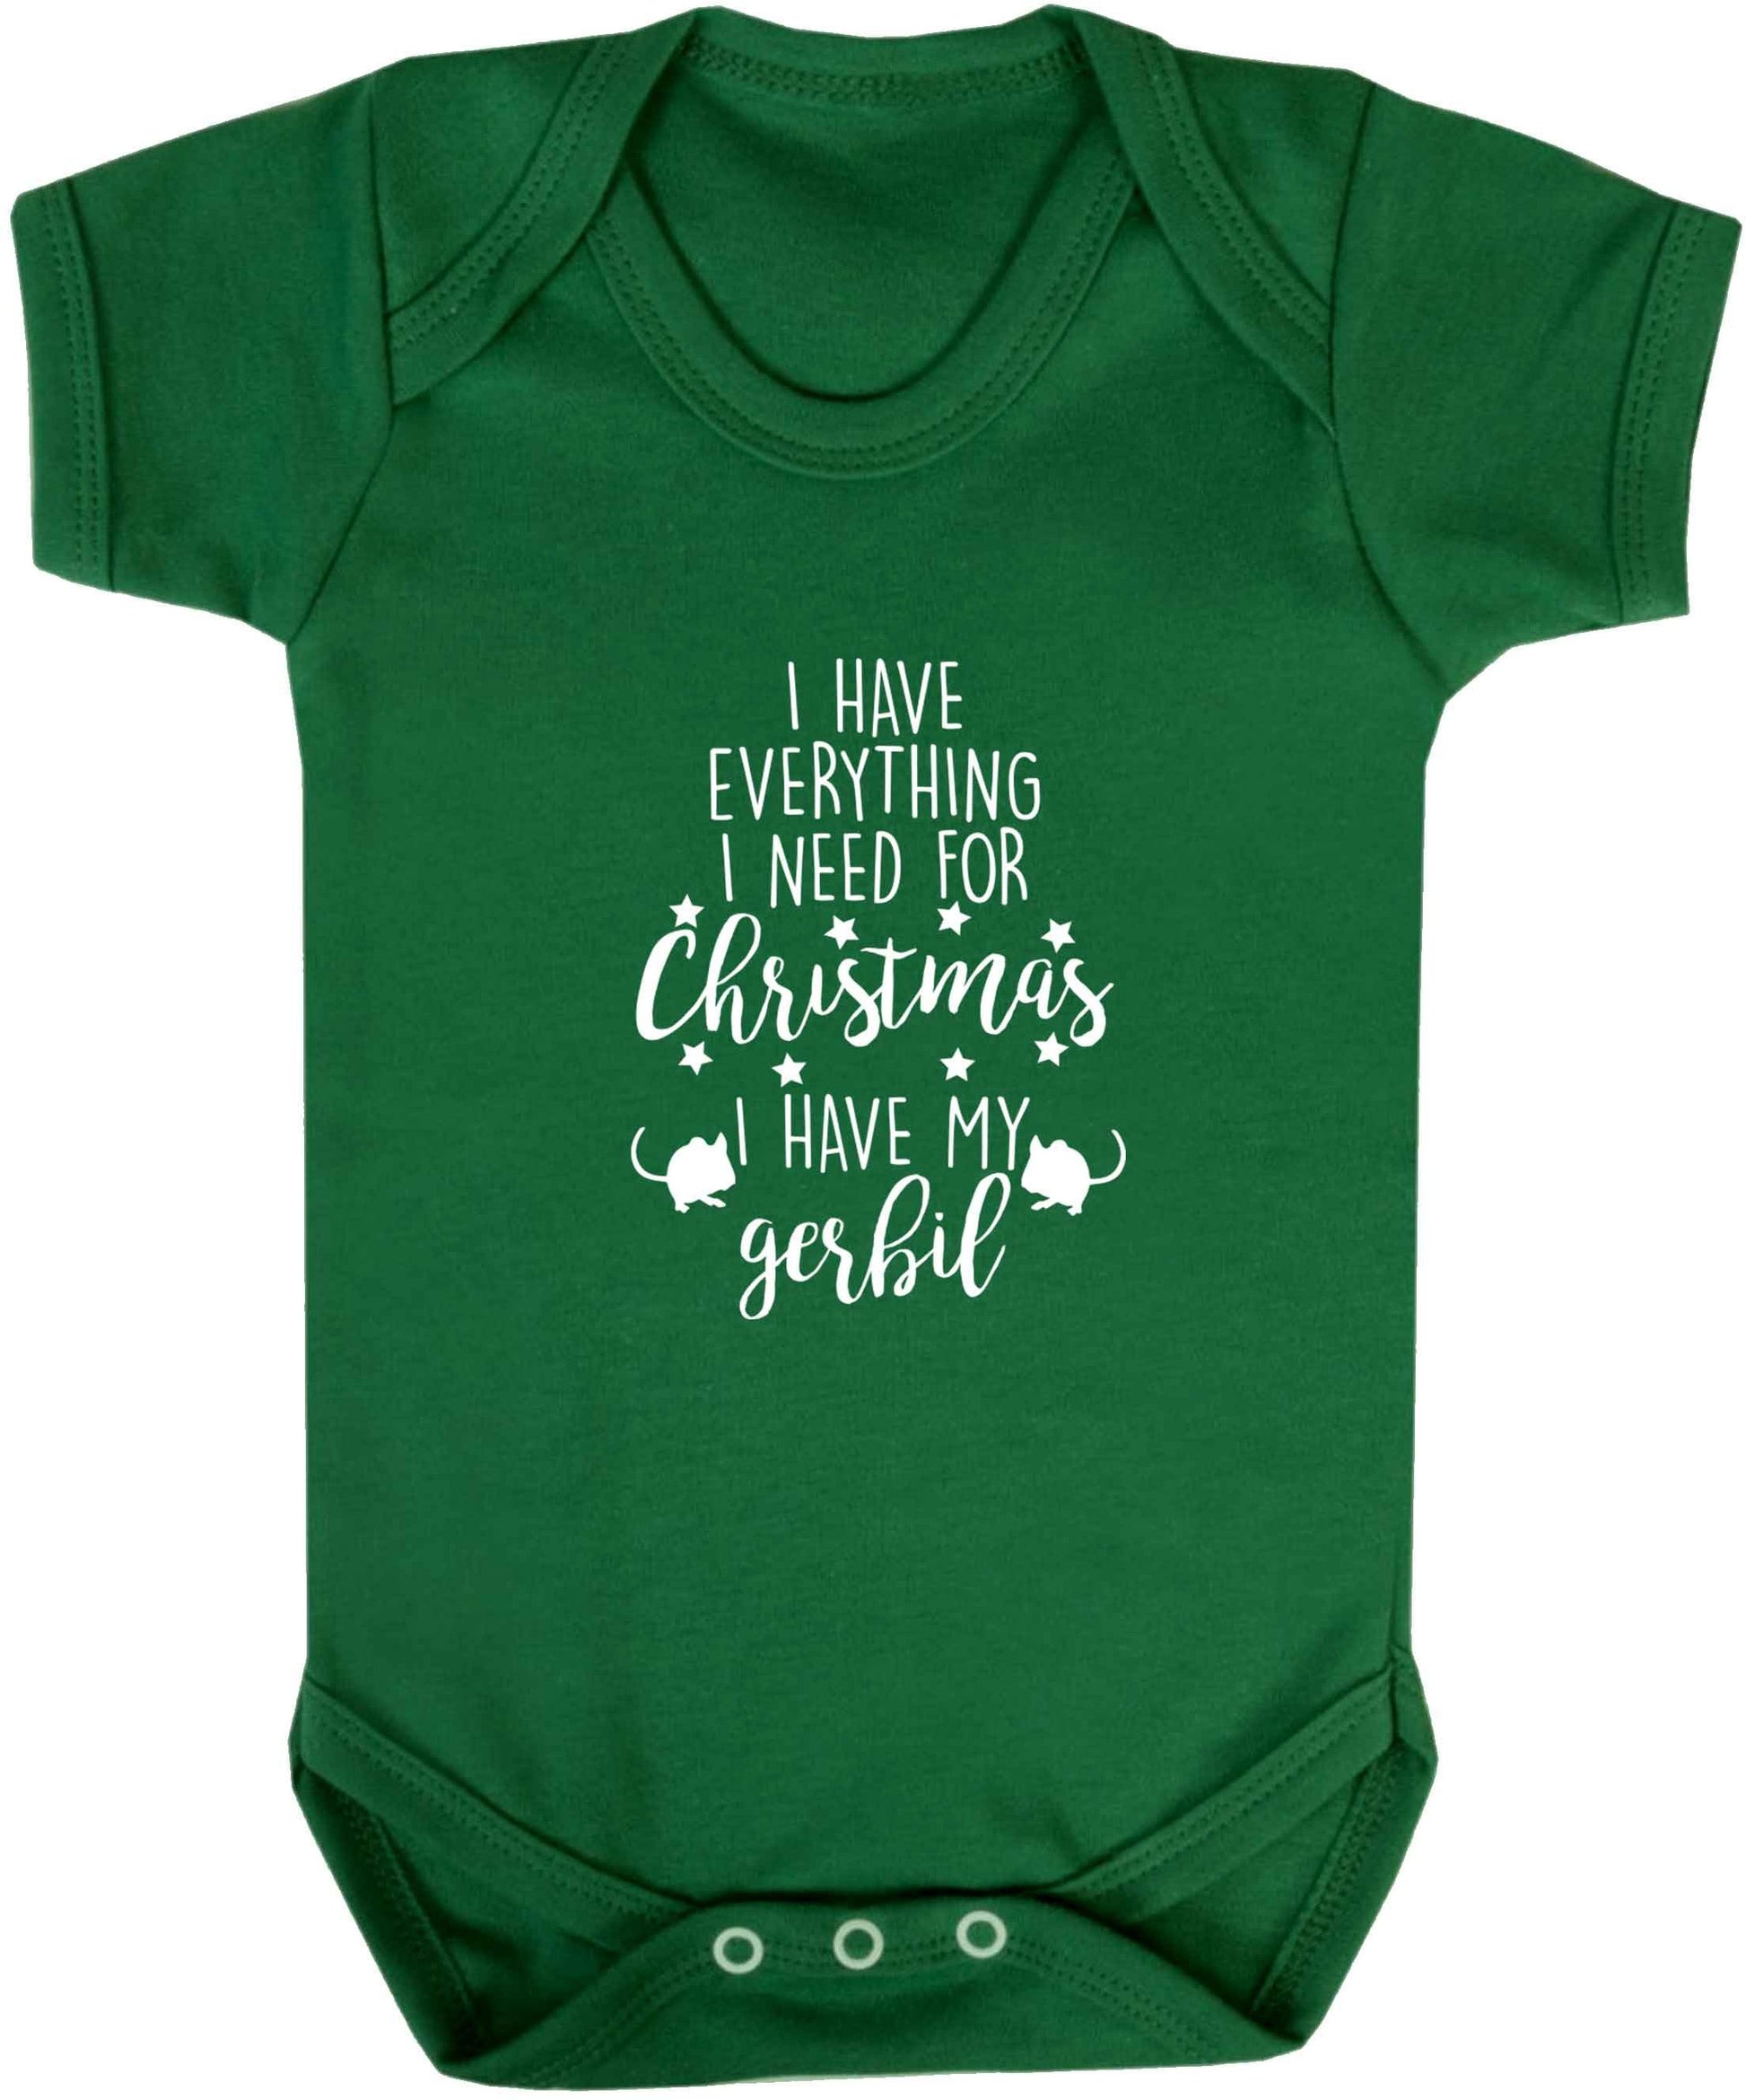 I have everything I need for Christmas I have my gerbil baby vest green 18-24 months